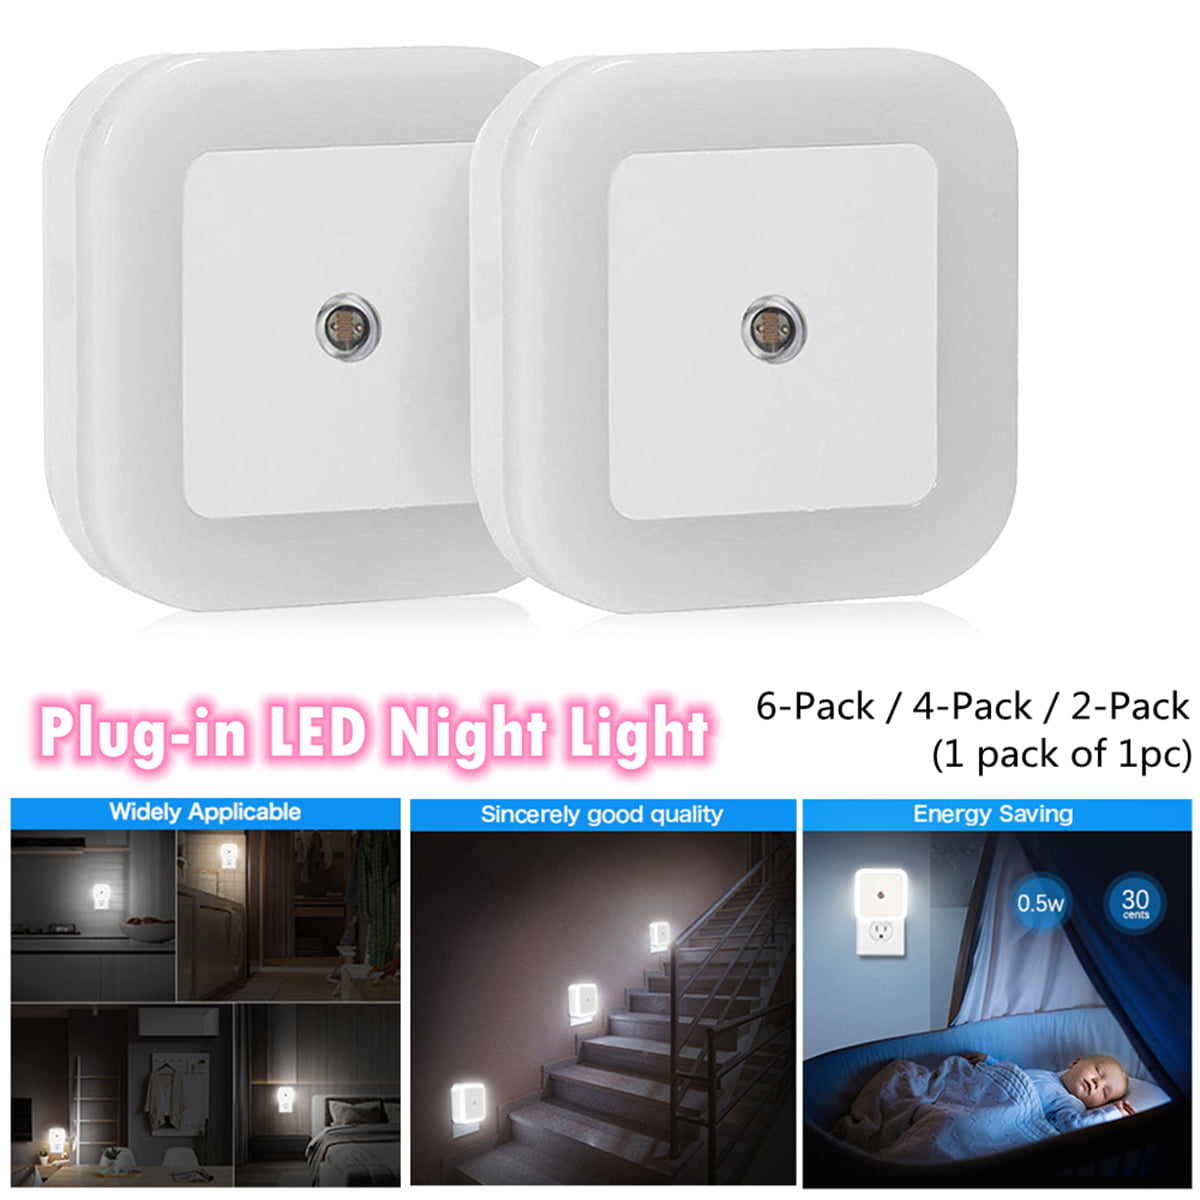 Automatic On Off LED Plug In Night Light Dusk To Dawn Energy Saving Single Pack 